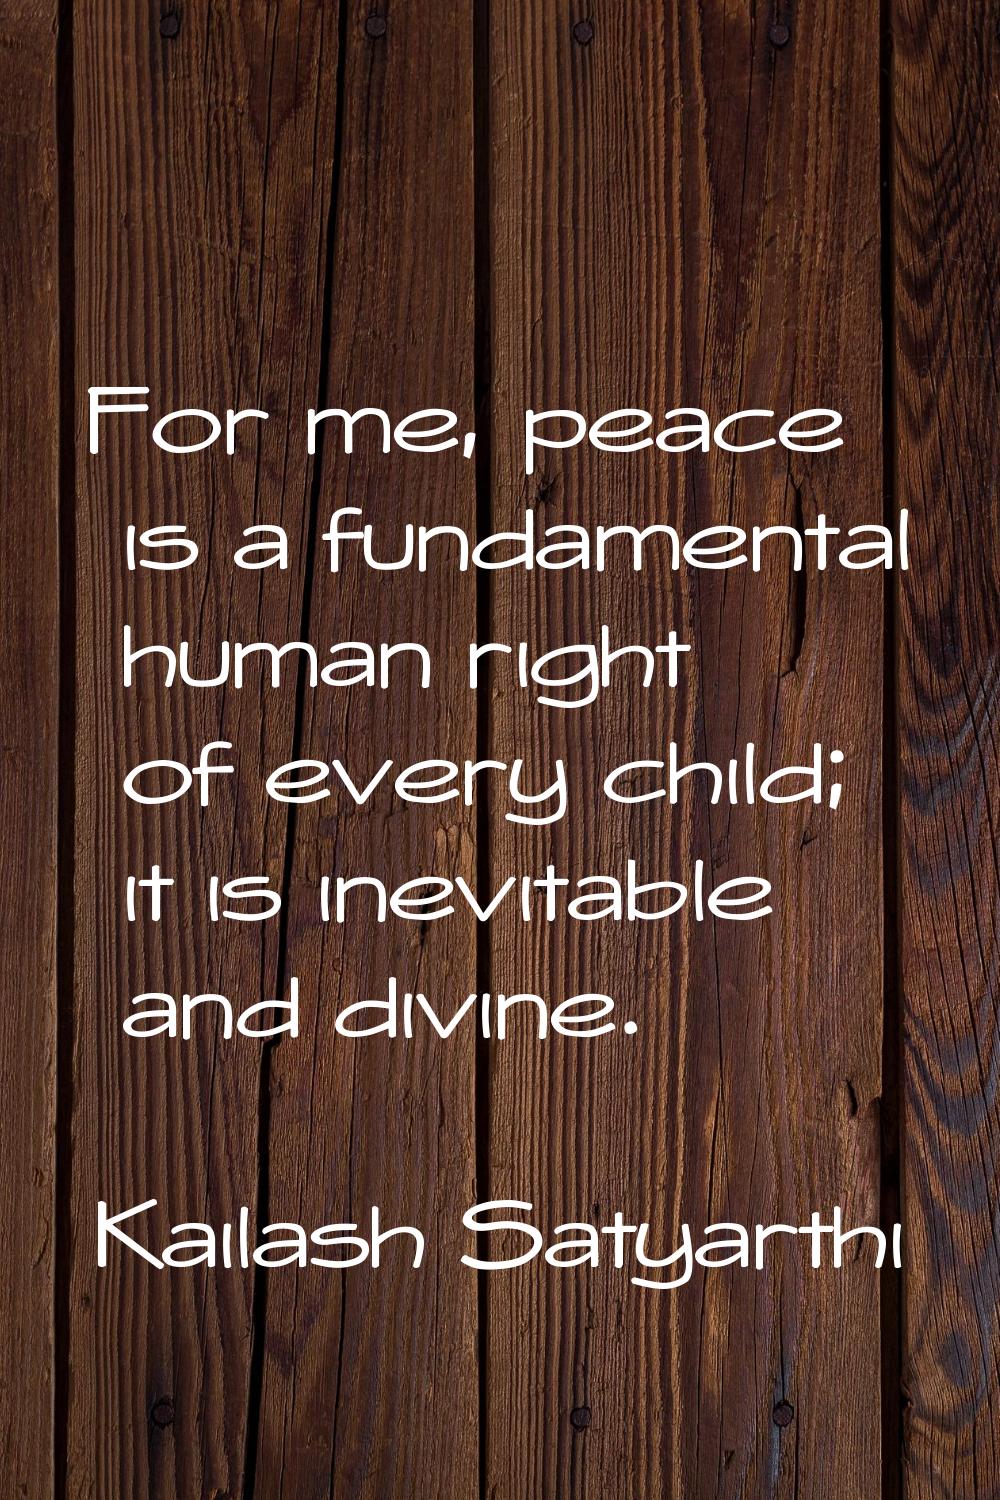 For me, peace is a fundamental human right of every child; it is inevitable and divine.